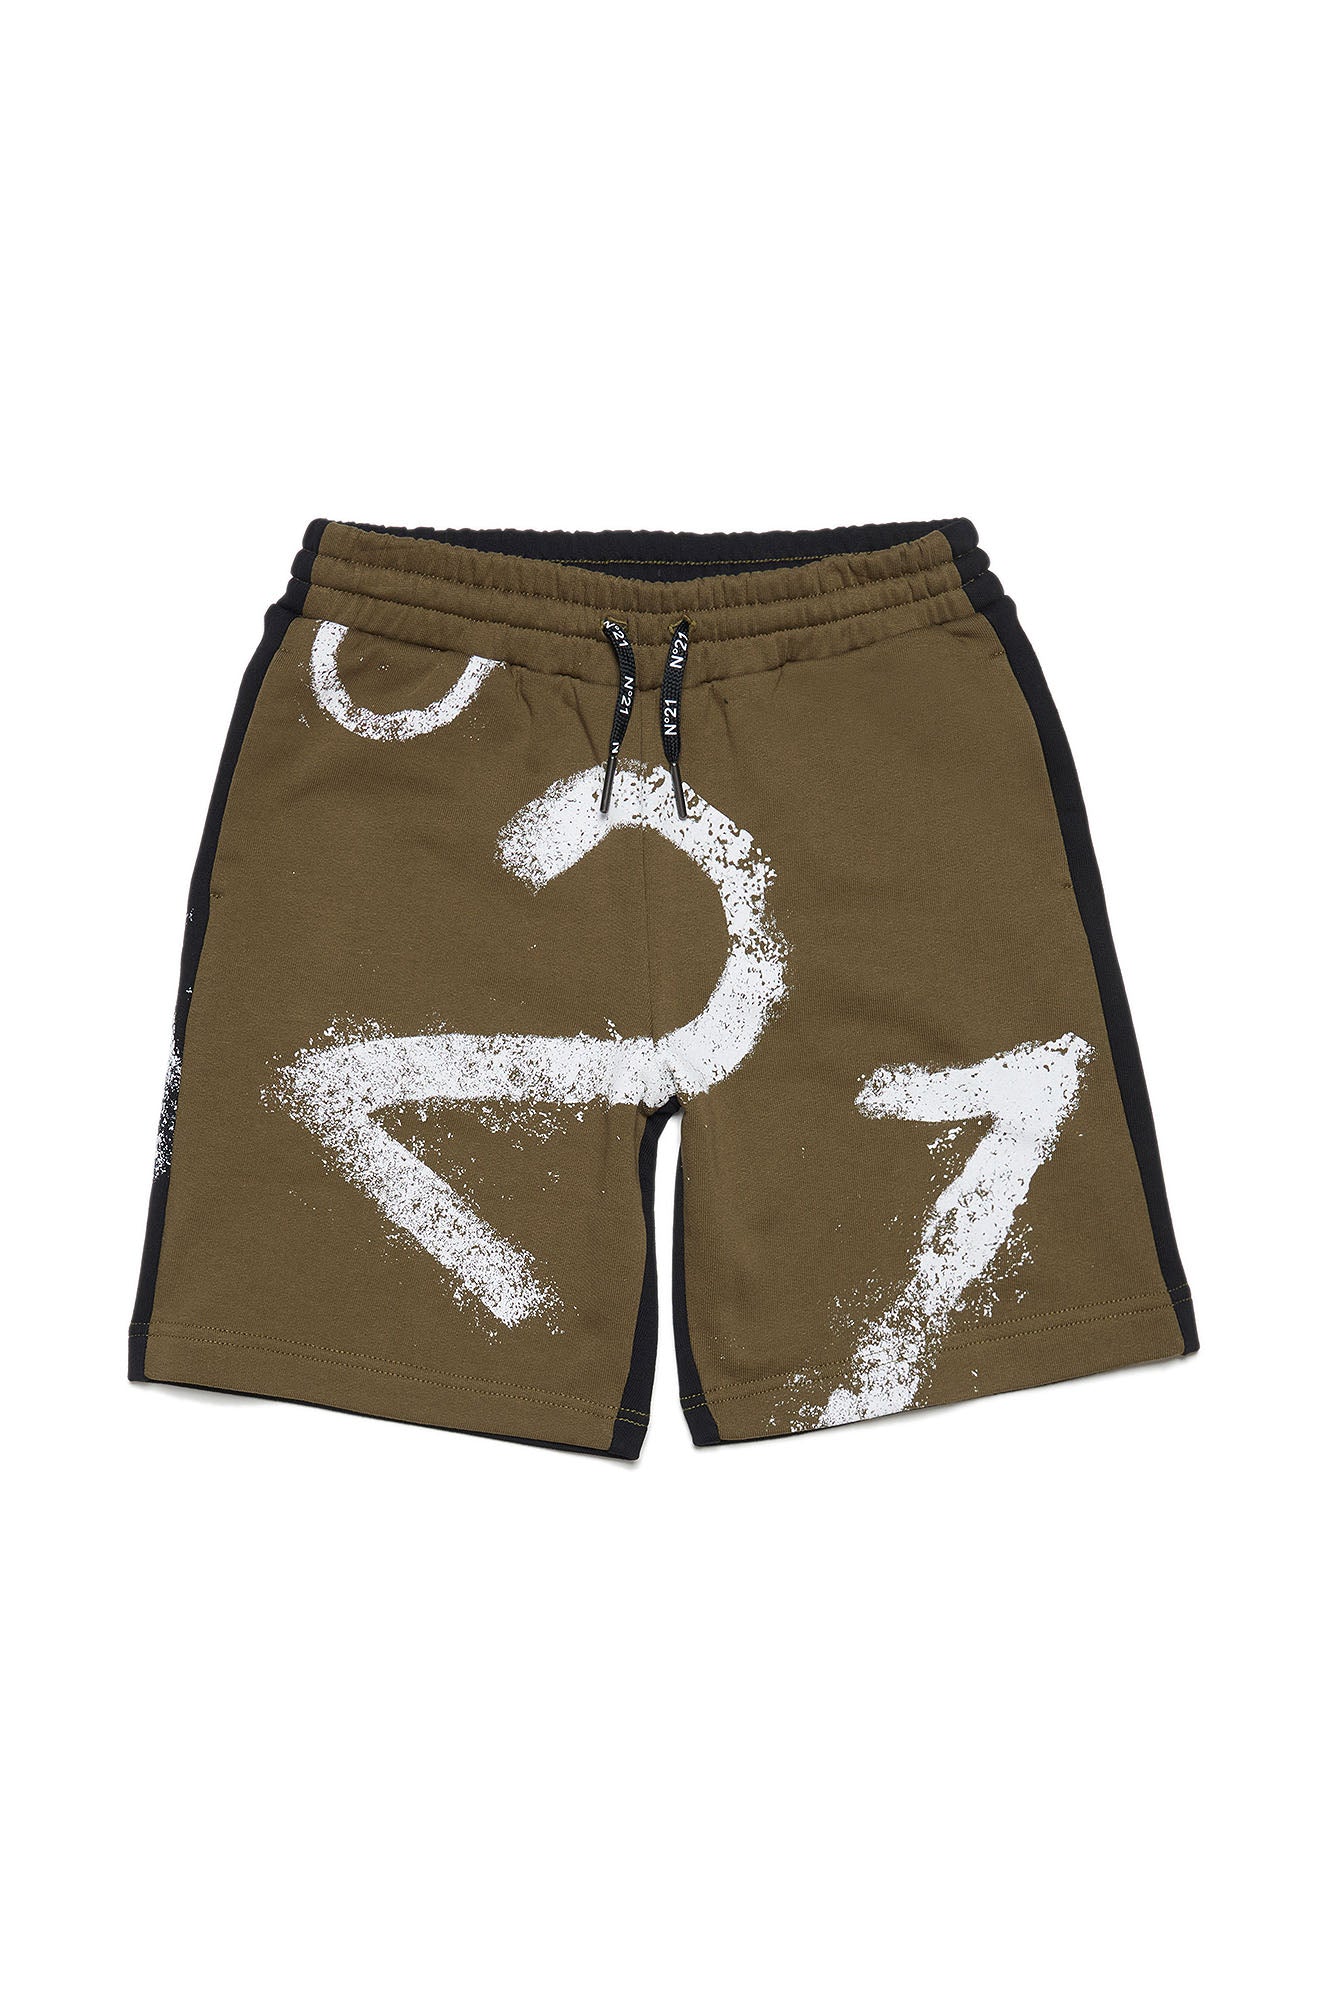 Two-tone green and black shorts with vintage effect logo